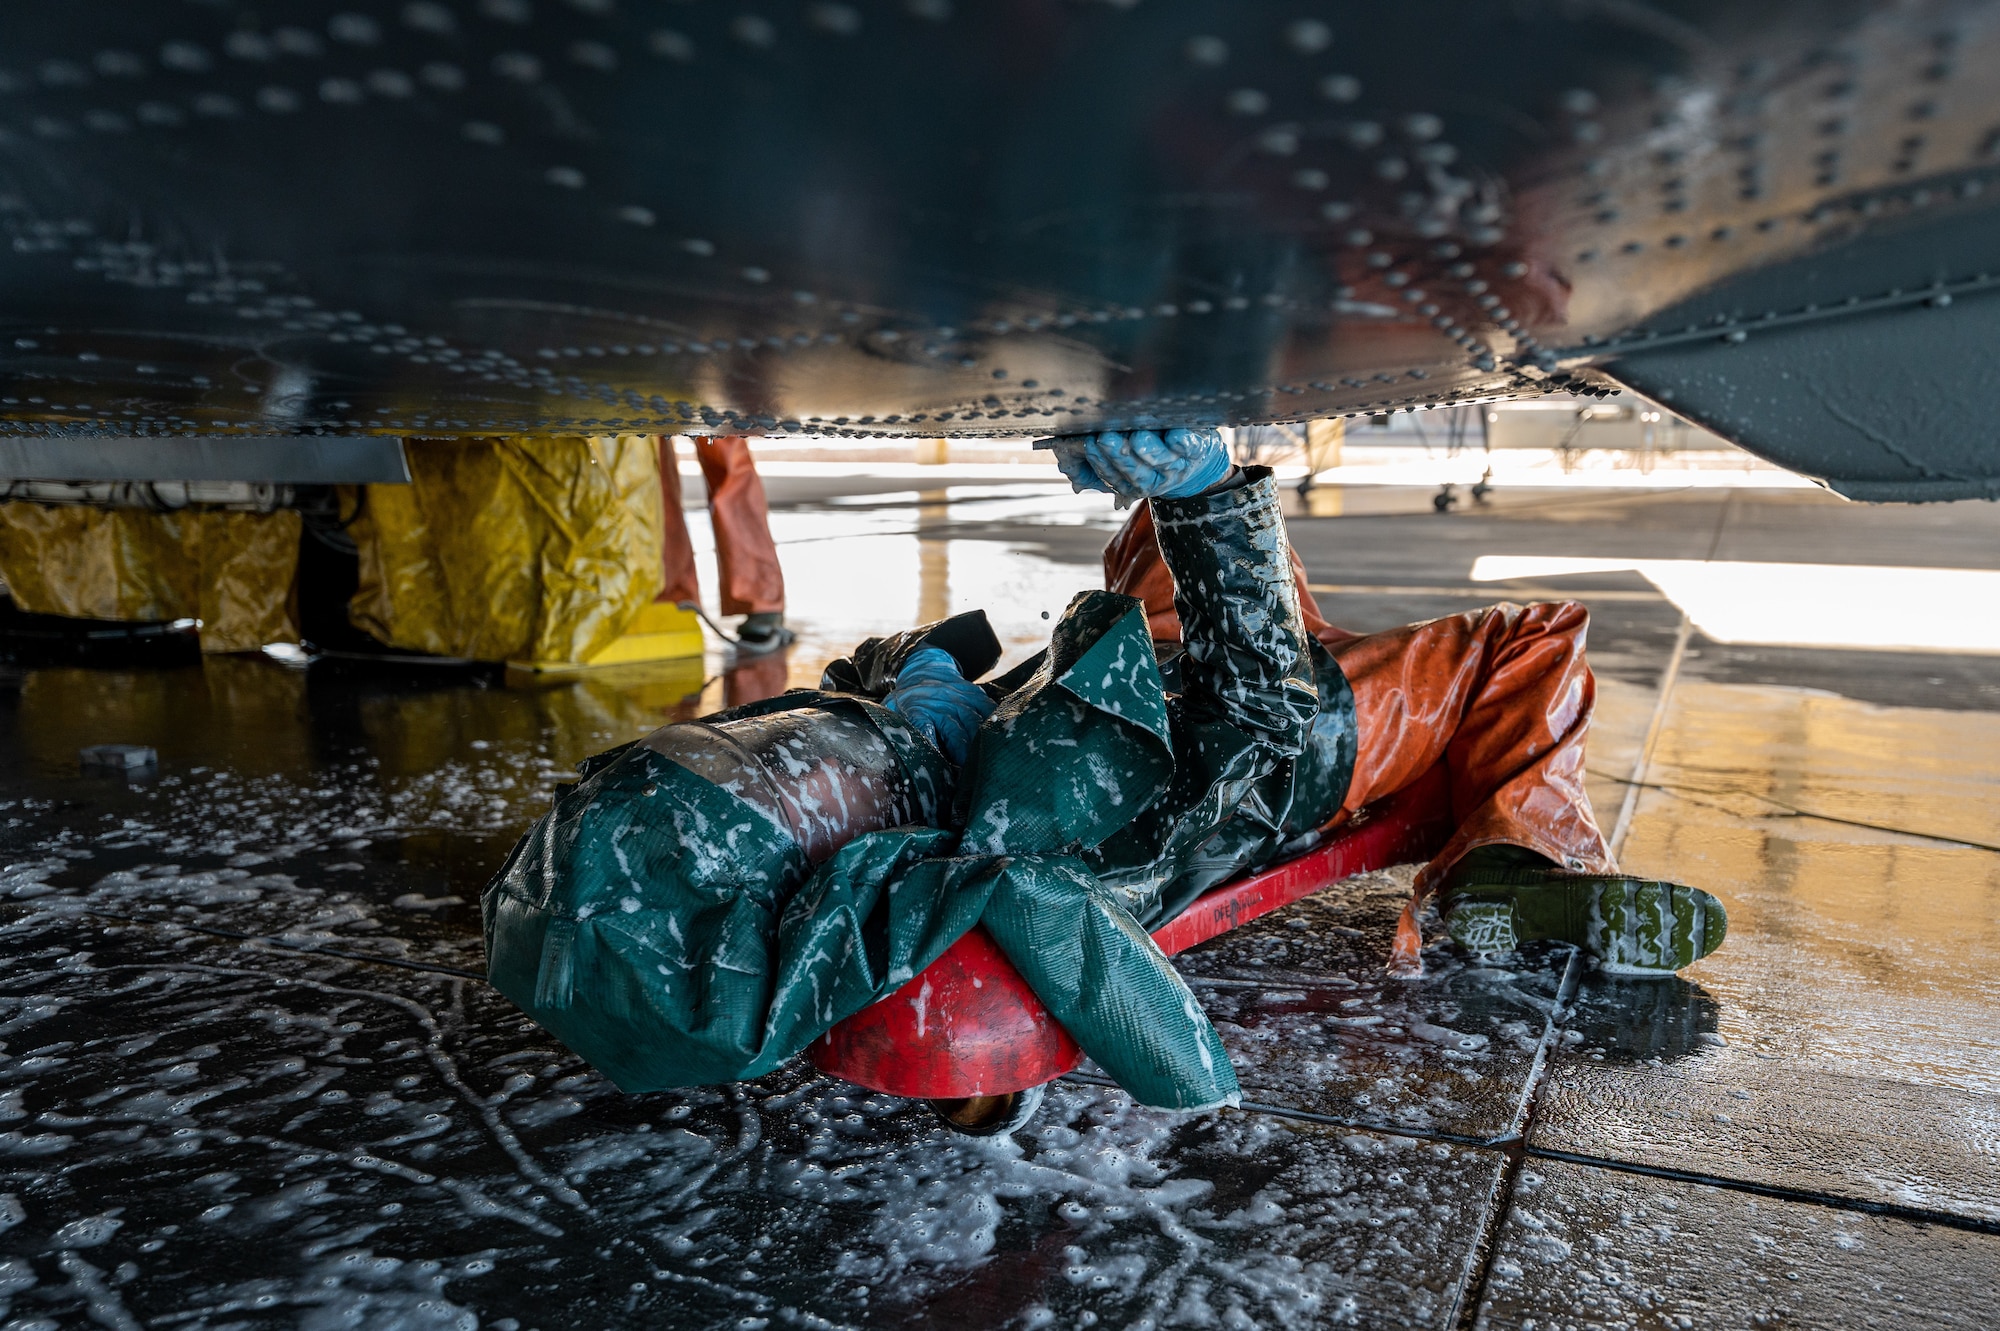 photo of a service member donning personal protective equipment washing underneath a large military aircraft